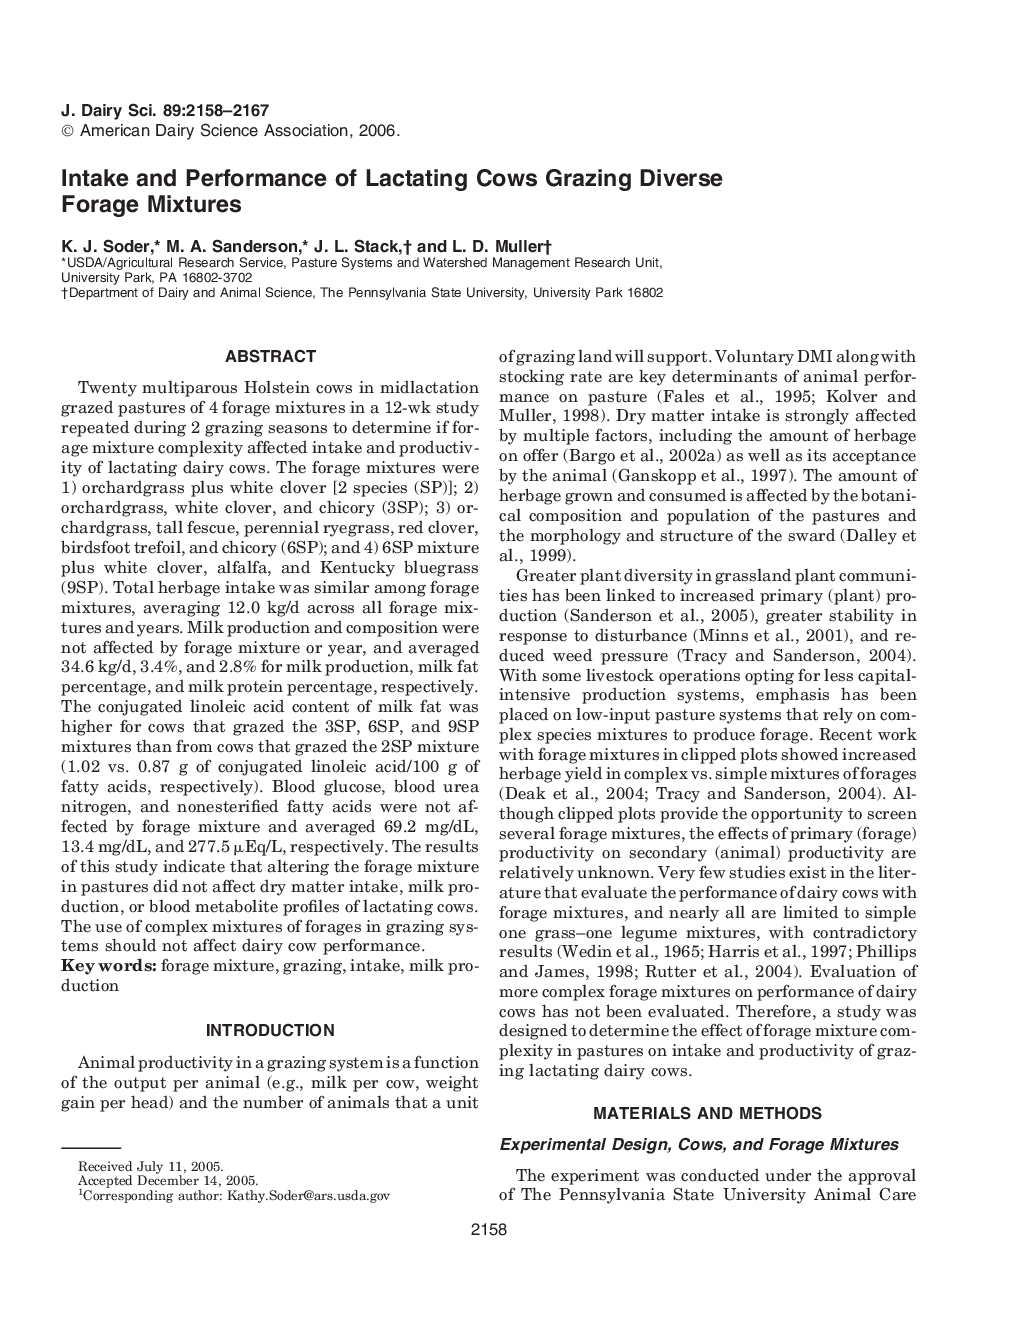 Intake and Performance of Lactating Cows Grazing Diverse Forage Mixtures